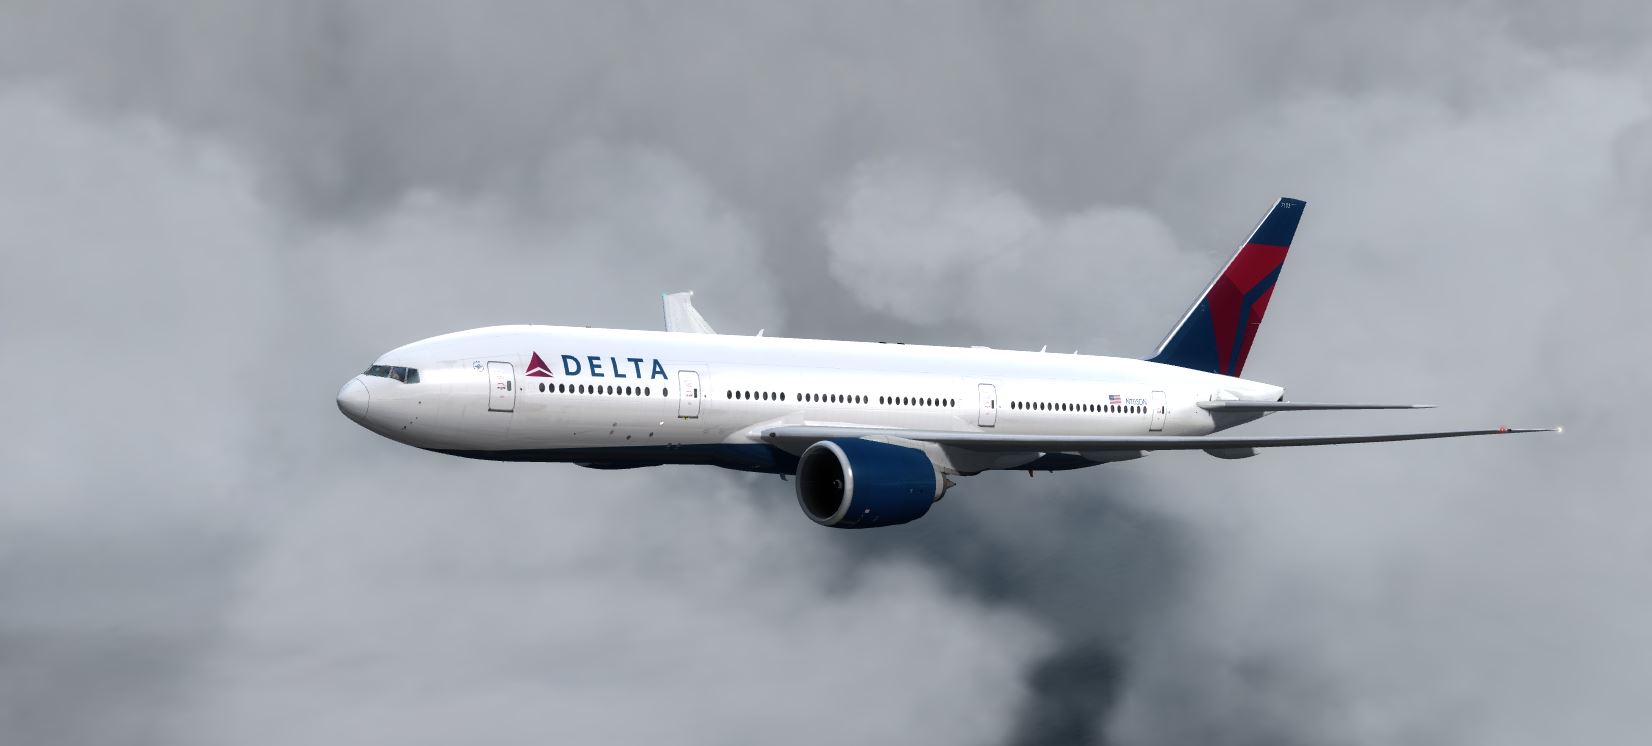 B777-200 Delta Airlines Standard Livery-2885 